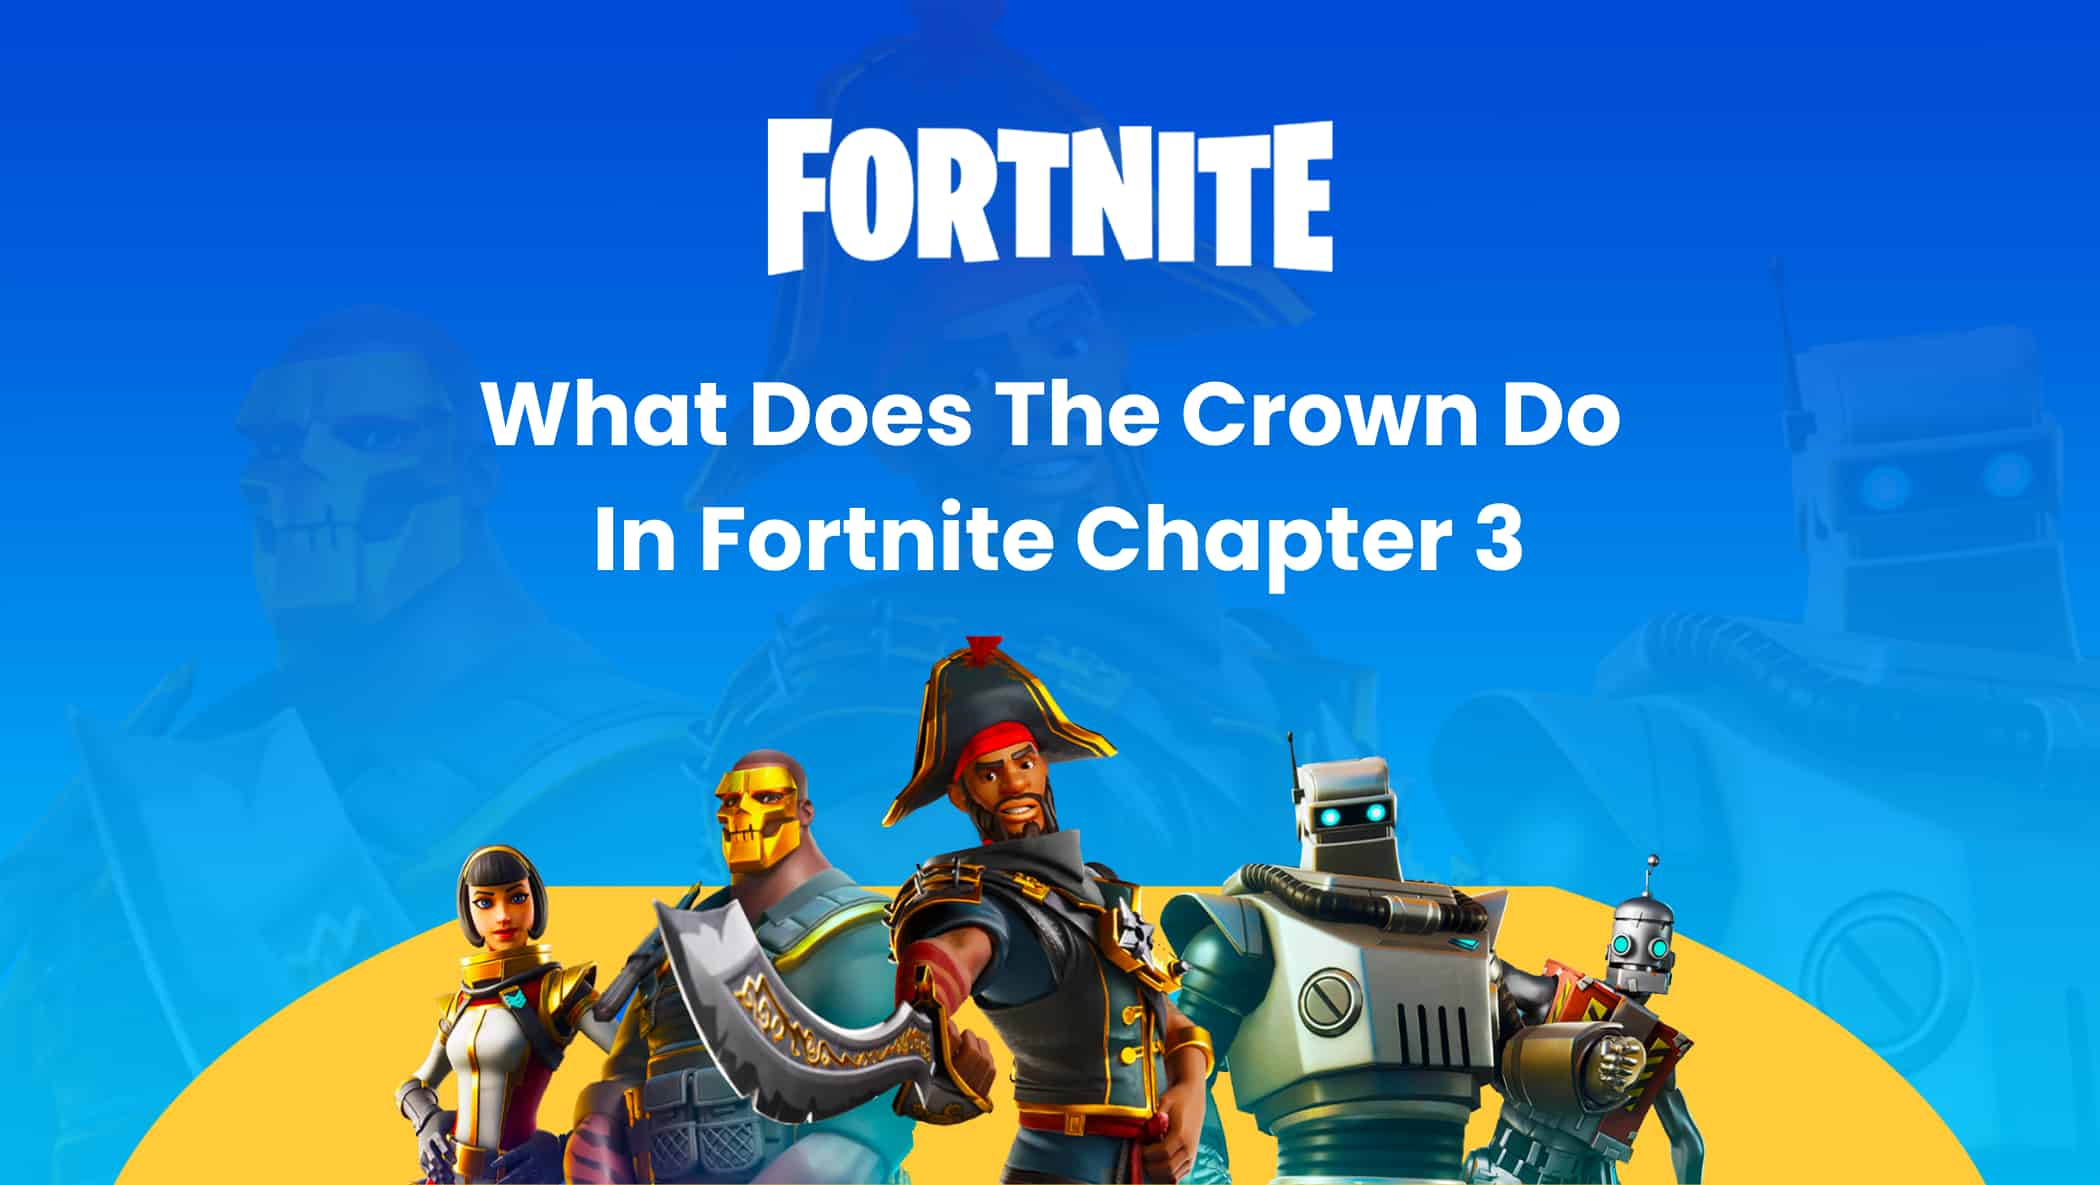 What Does The Crown Do In Fortnite Chapter 3 Image